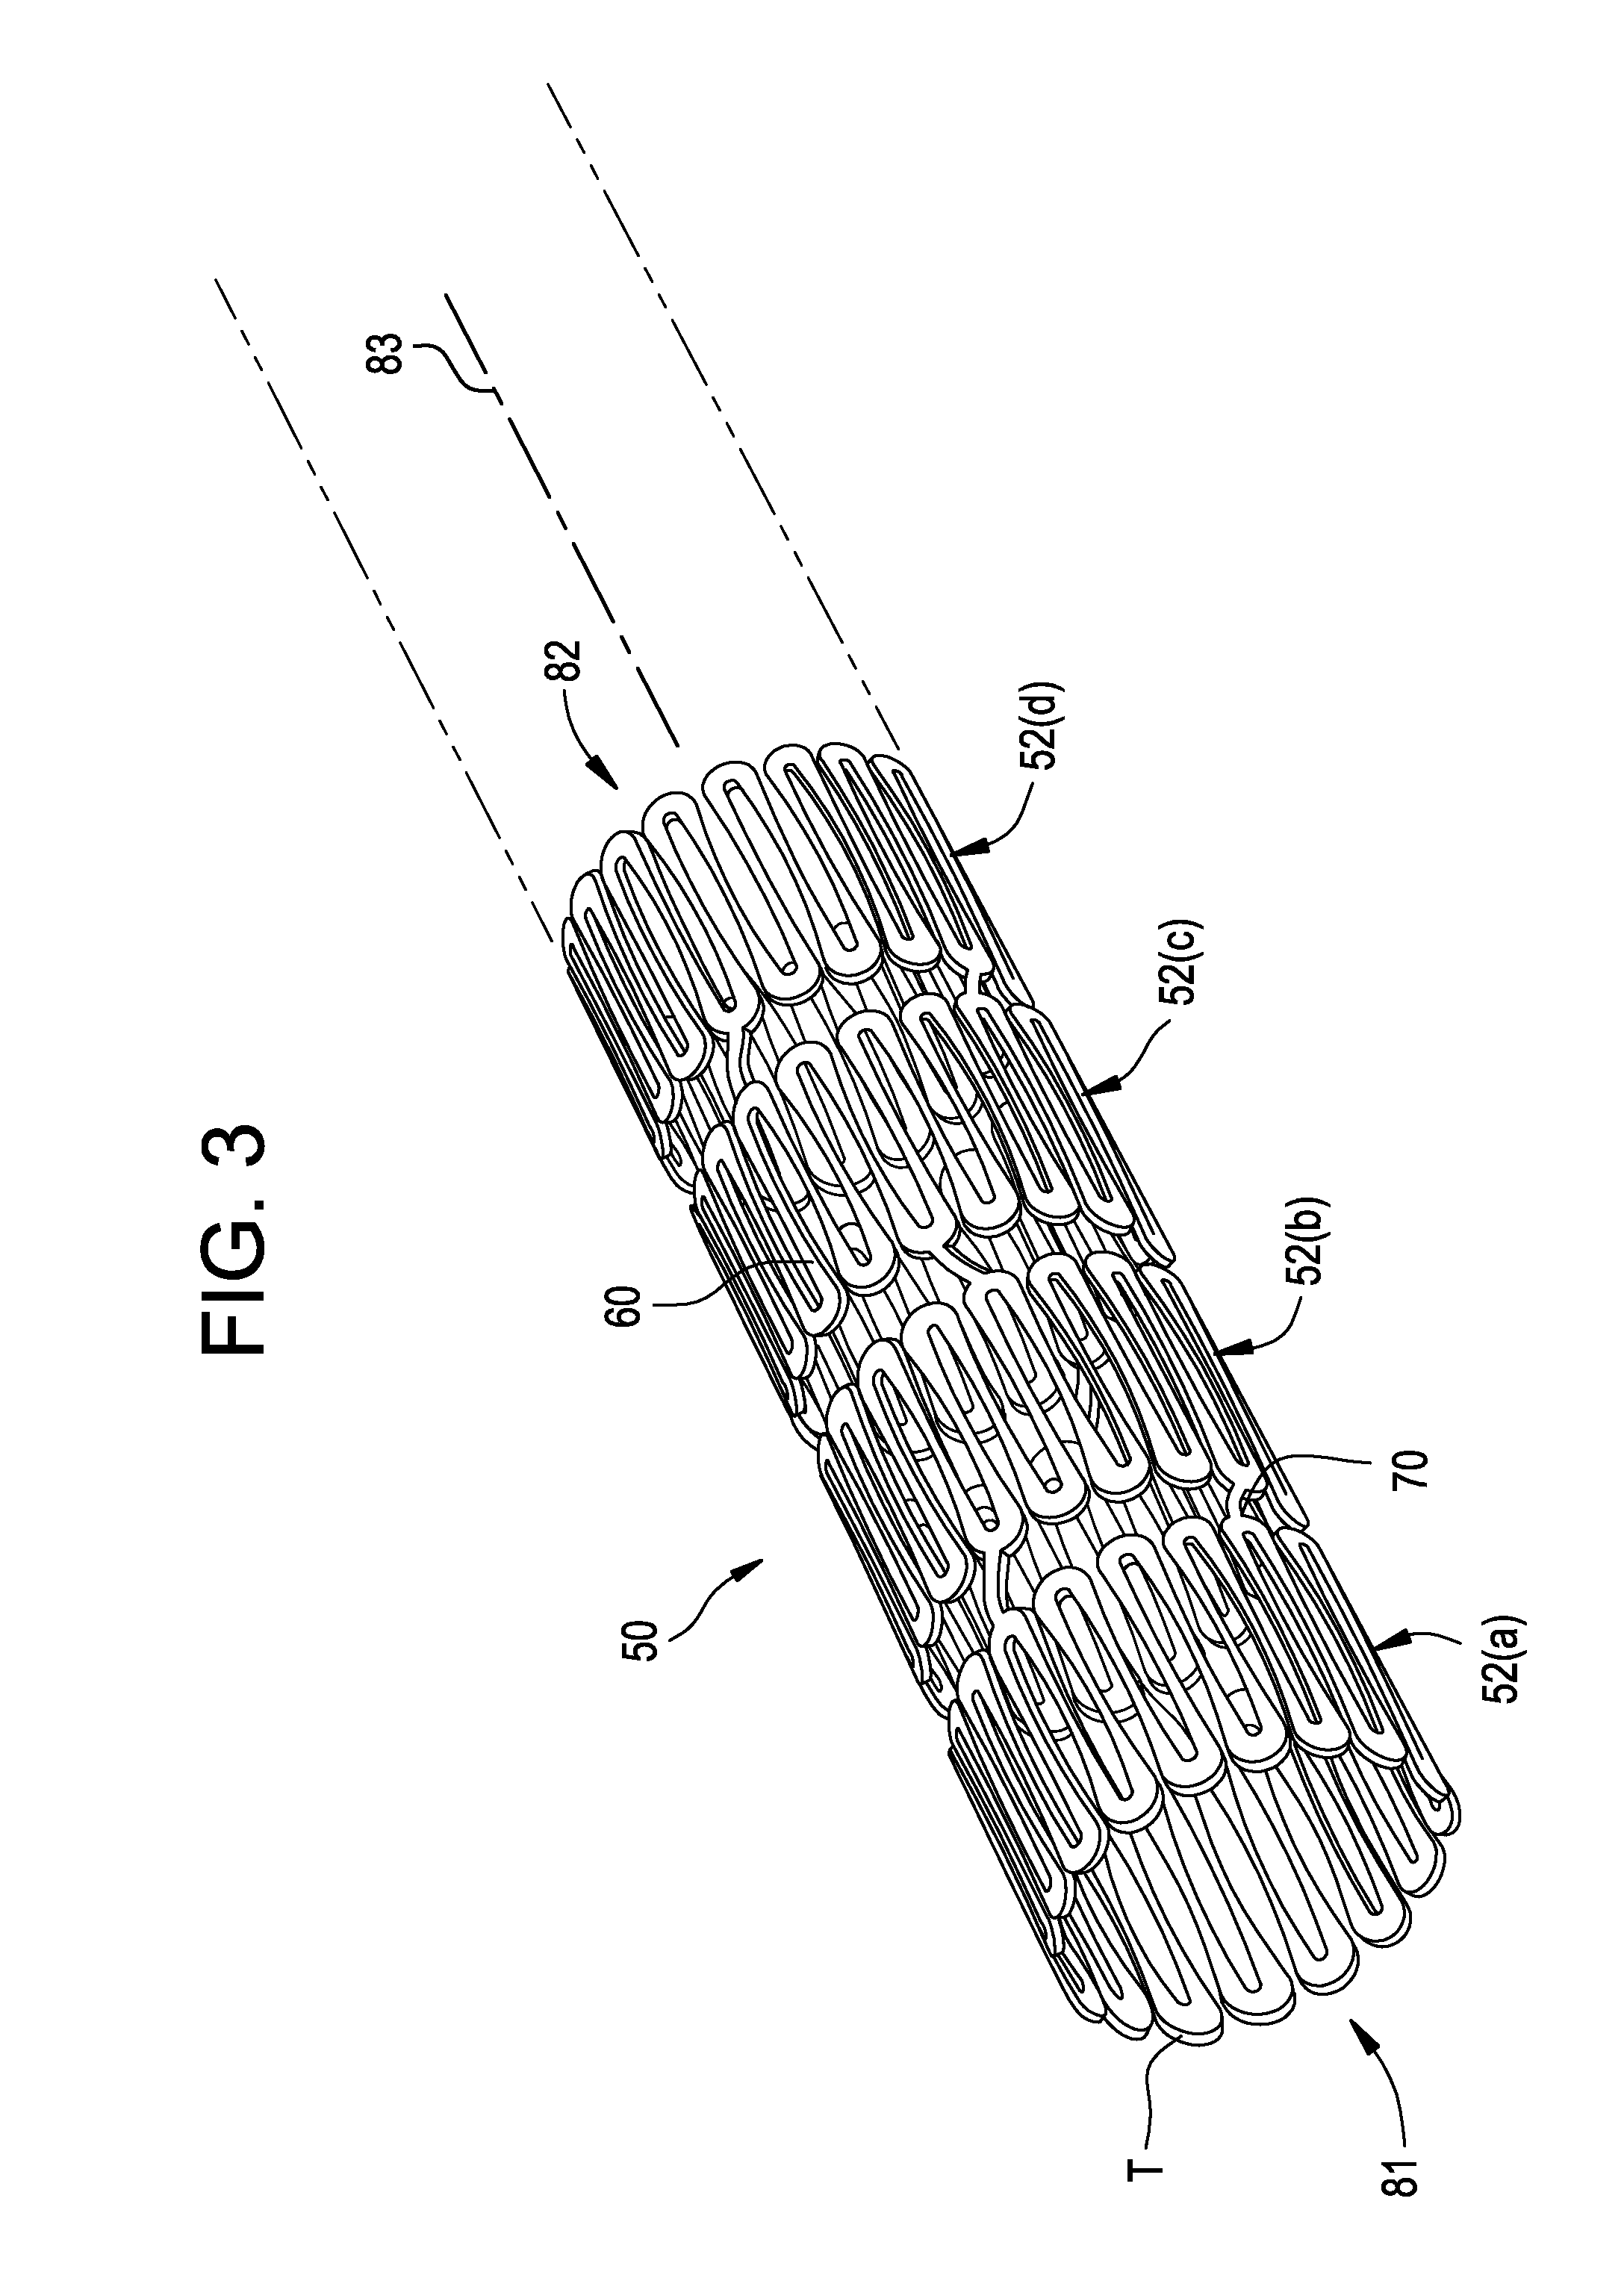 Intravascular stent having imrproved design for loading and deploying